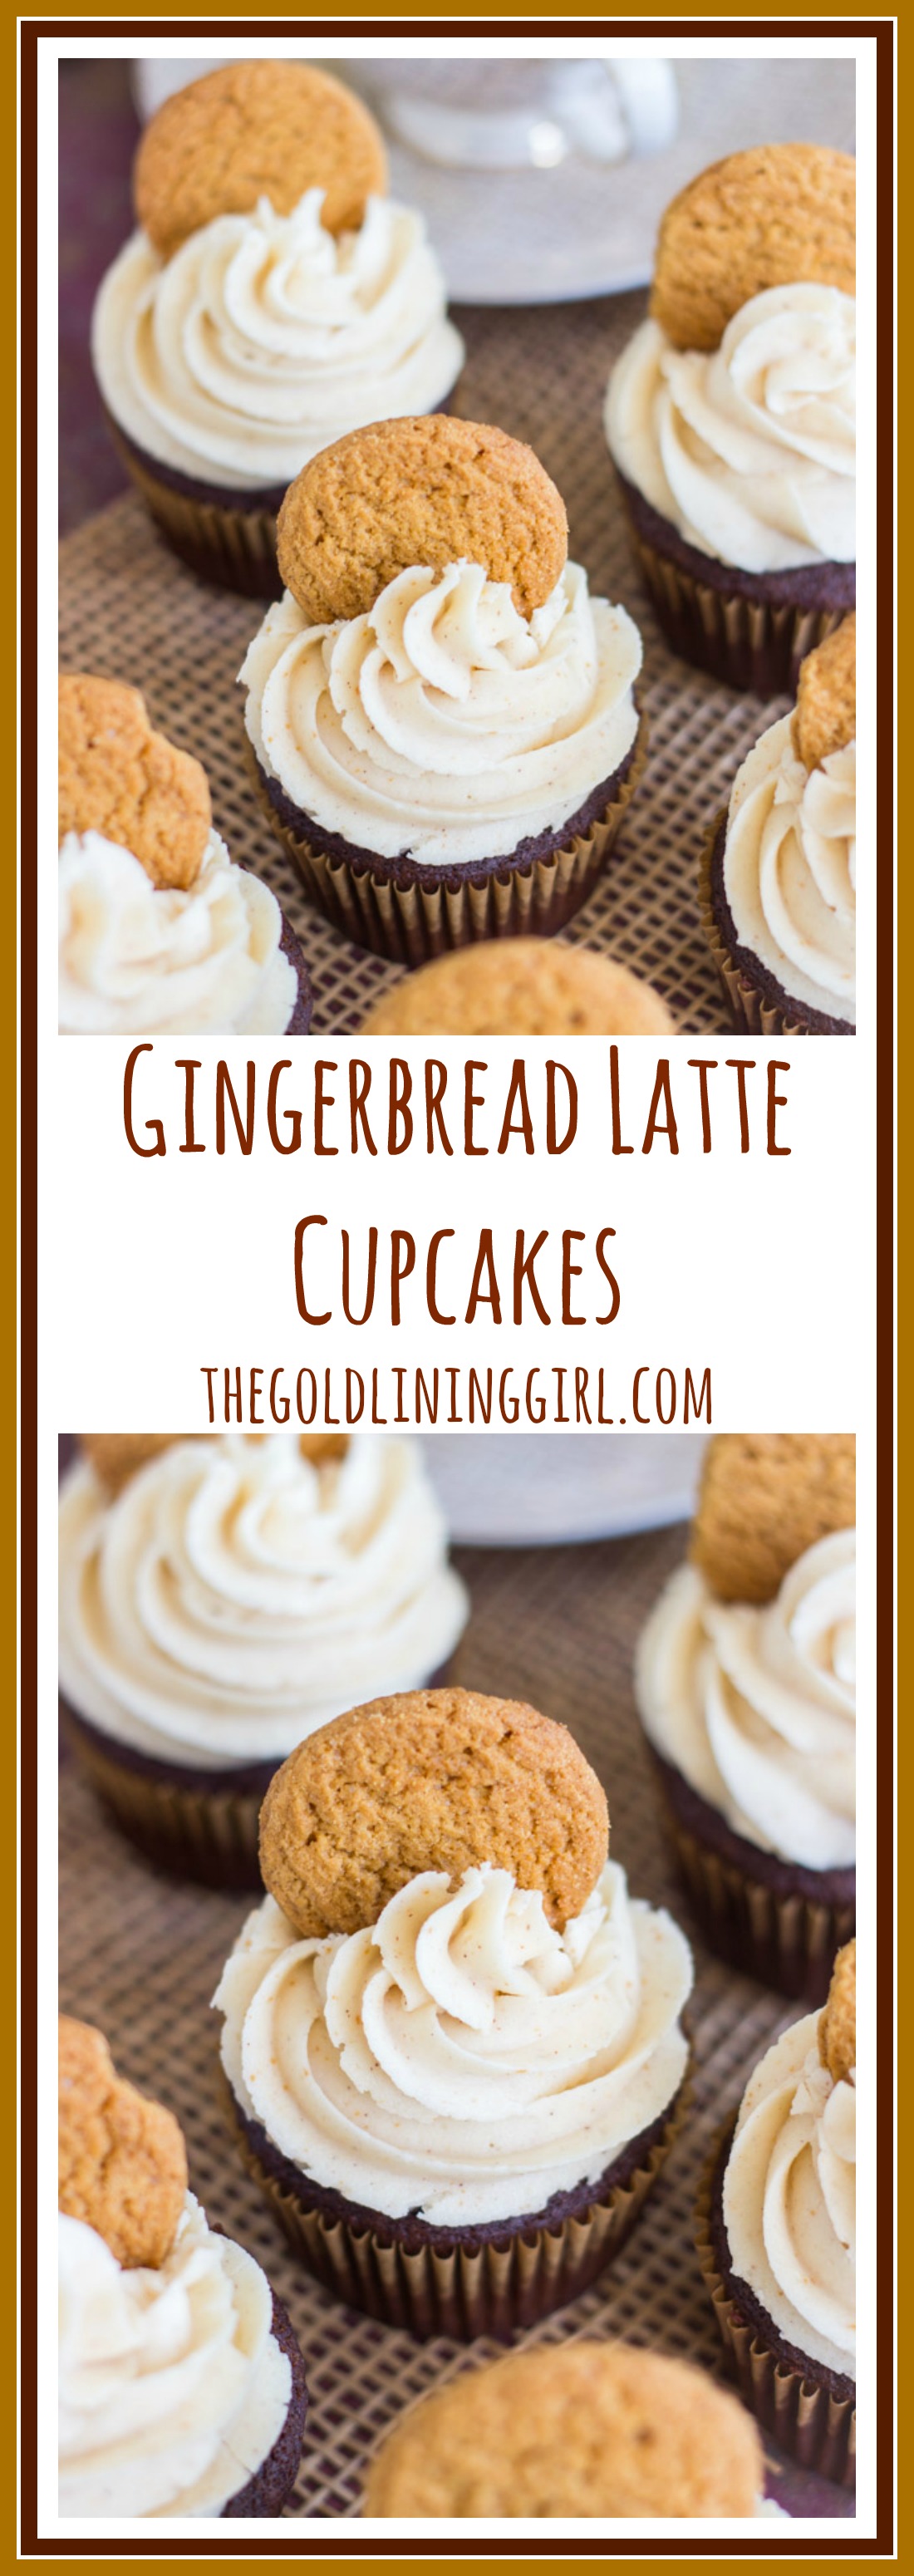 Gingerbread Latte Cupcakes with Brown Butter Buttercream